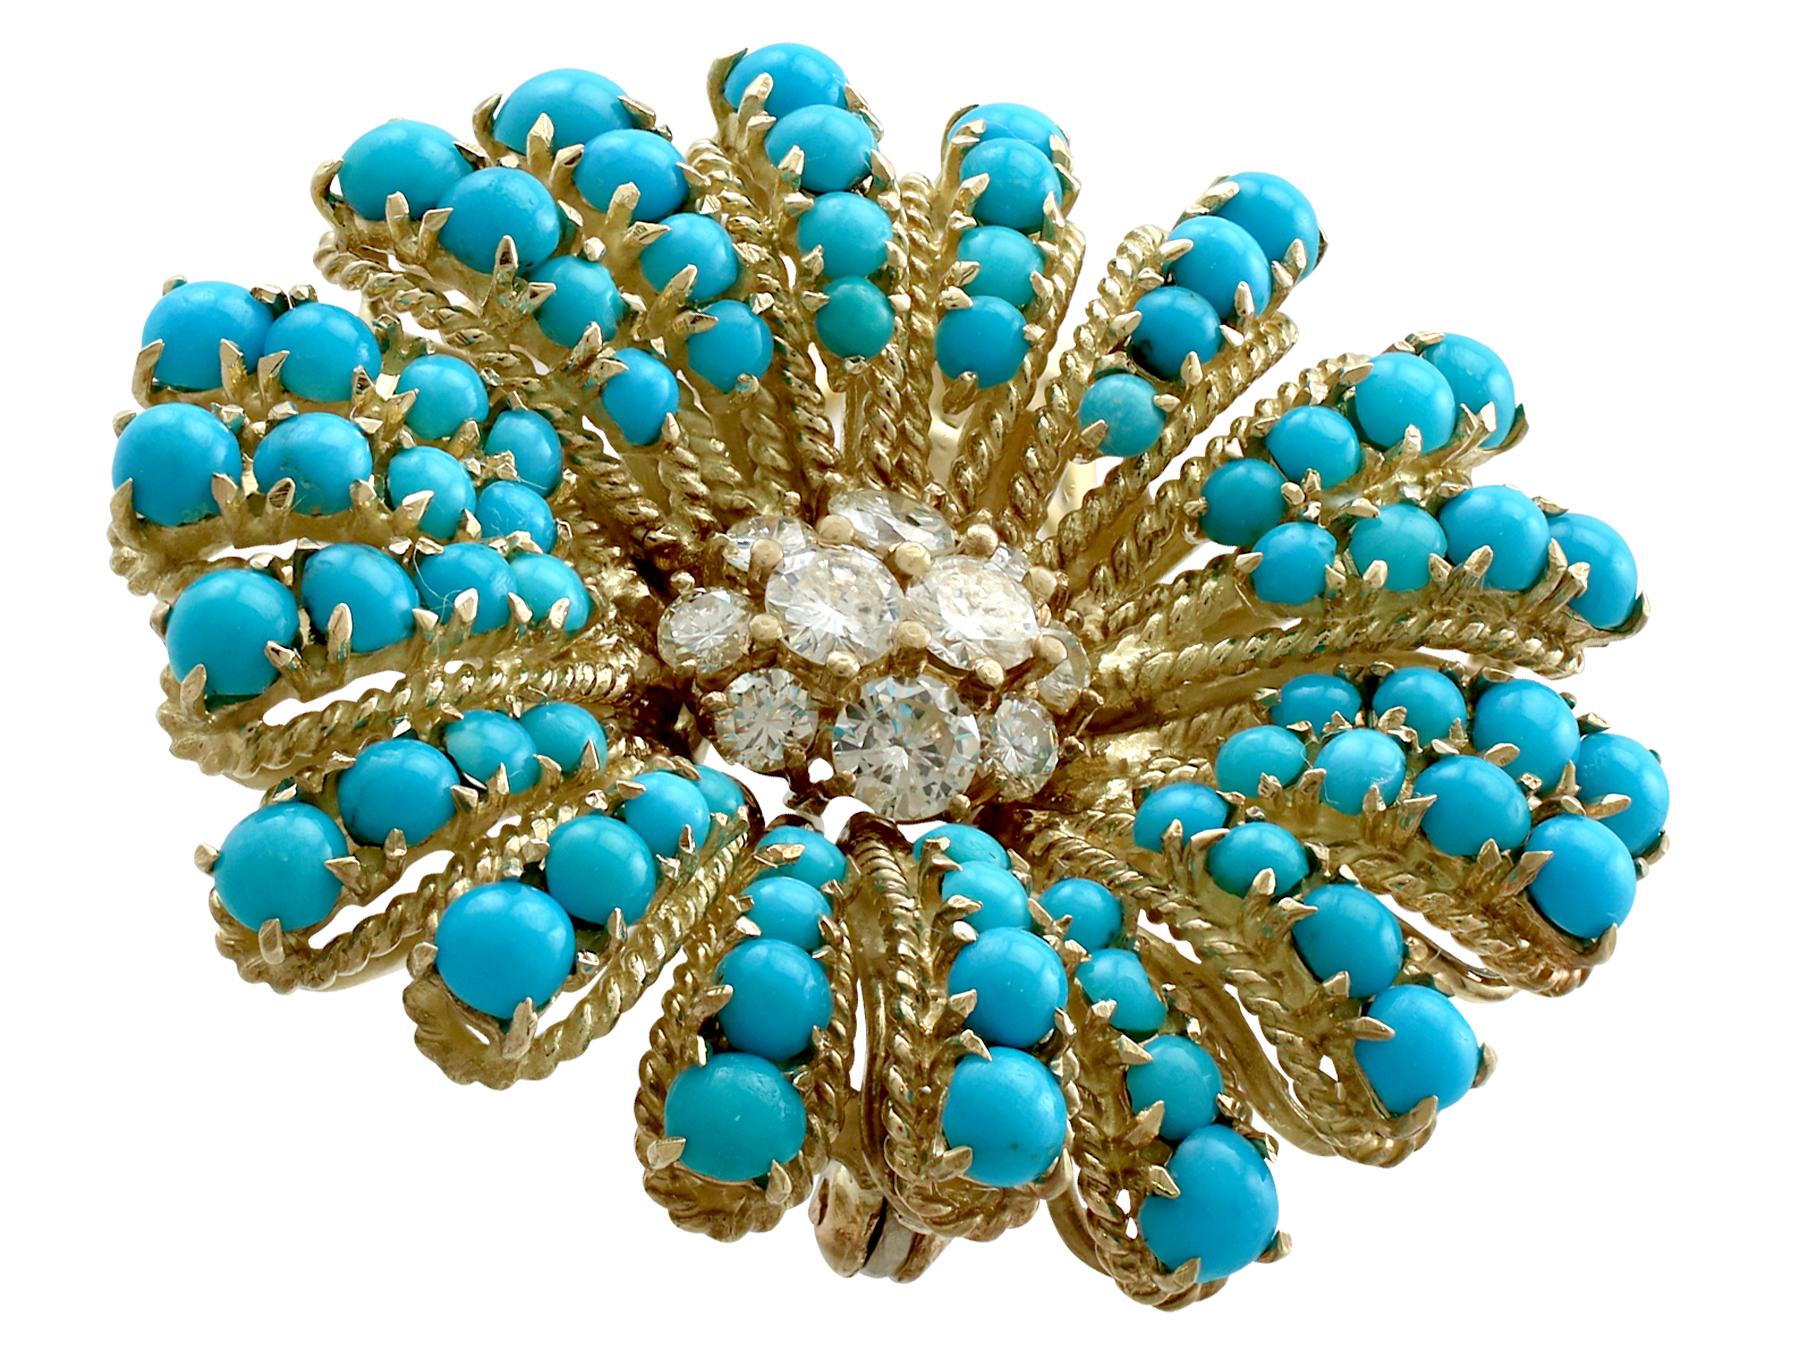 A stunning large vintage 6.66 carat turquoise and 1.48 carat diamond, 18 karat yellow gold 'flower' brooch by Ben Rosenfeld; part of our diverse gemstone jewelry collections.

This stunning, fine and impressive vintage turquoise flower brooch has